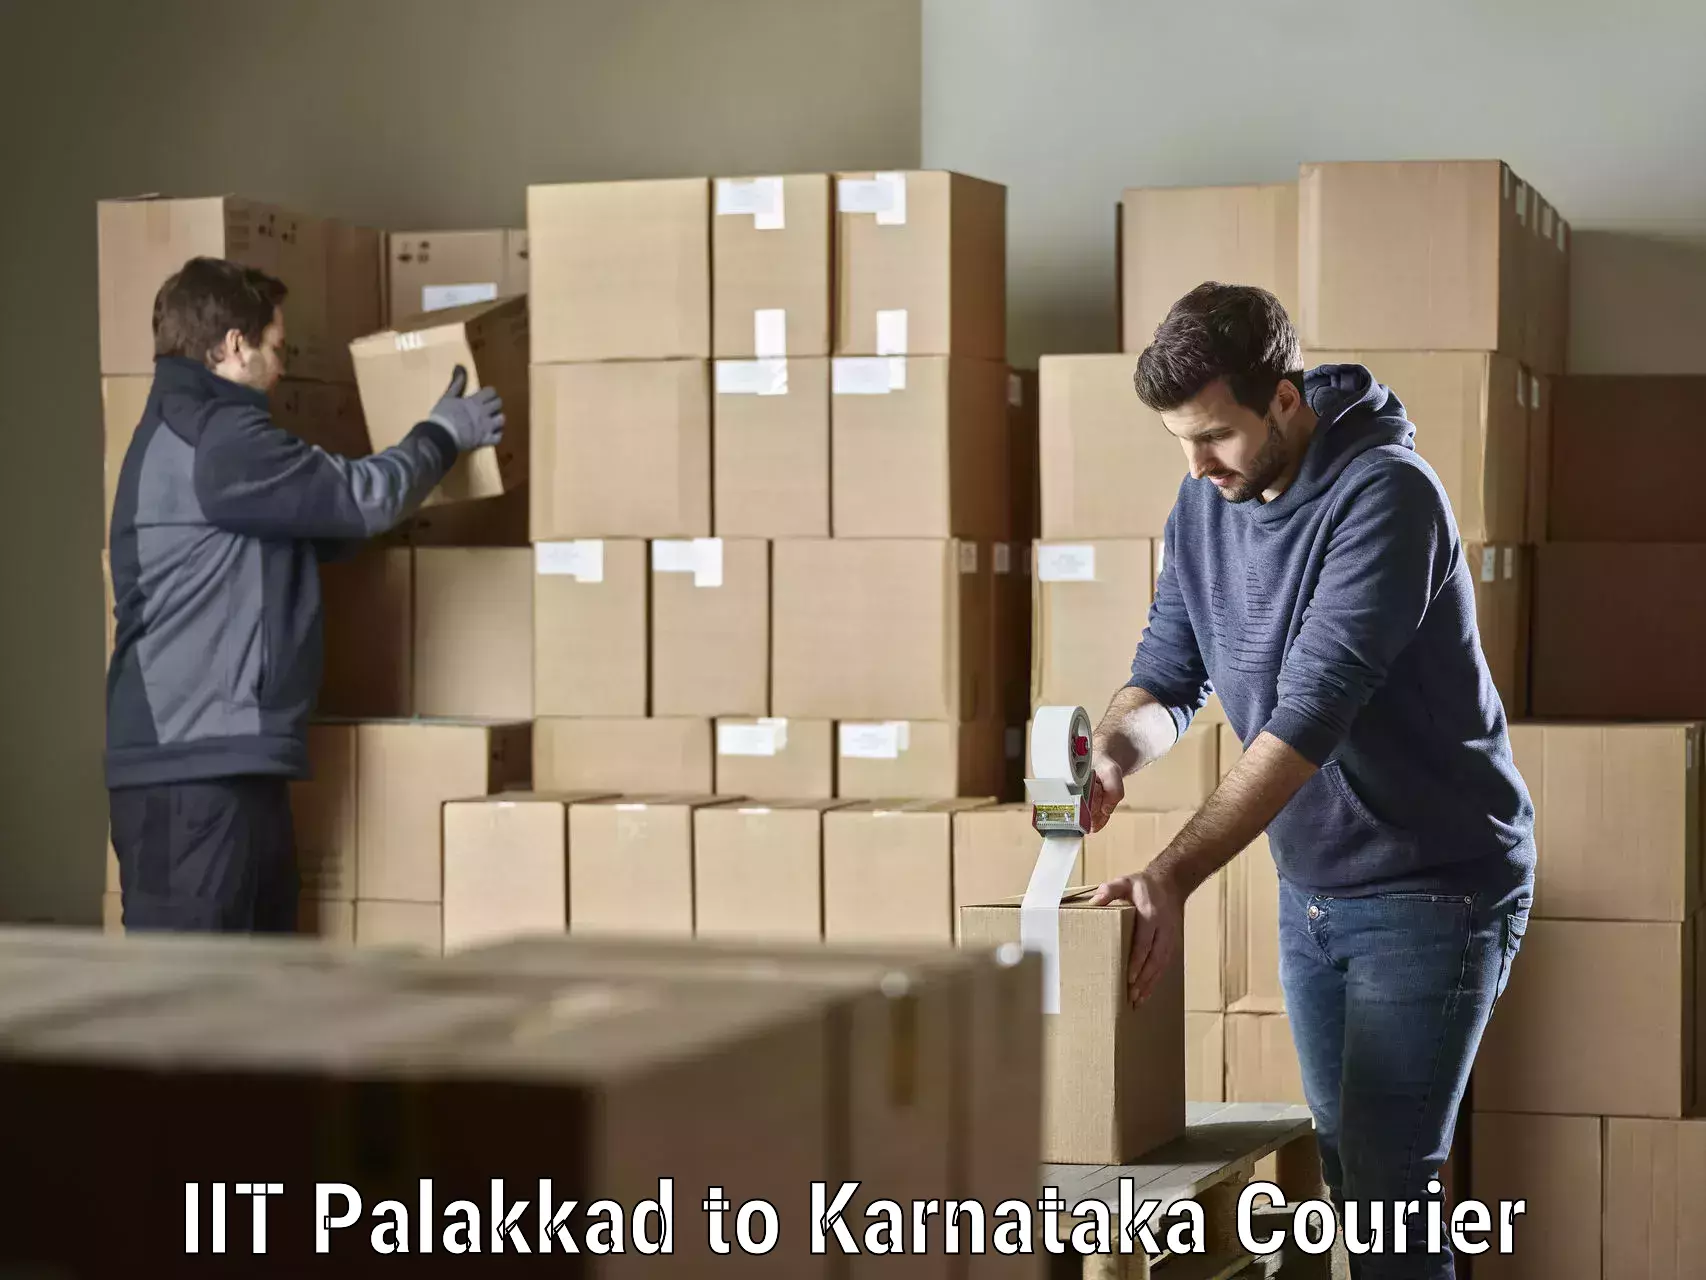 Easy access courier services IIT Palakkad to Deodurga